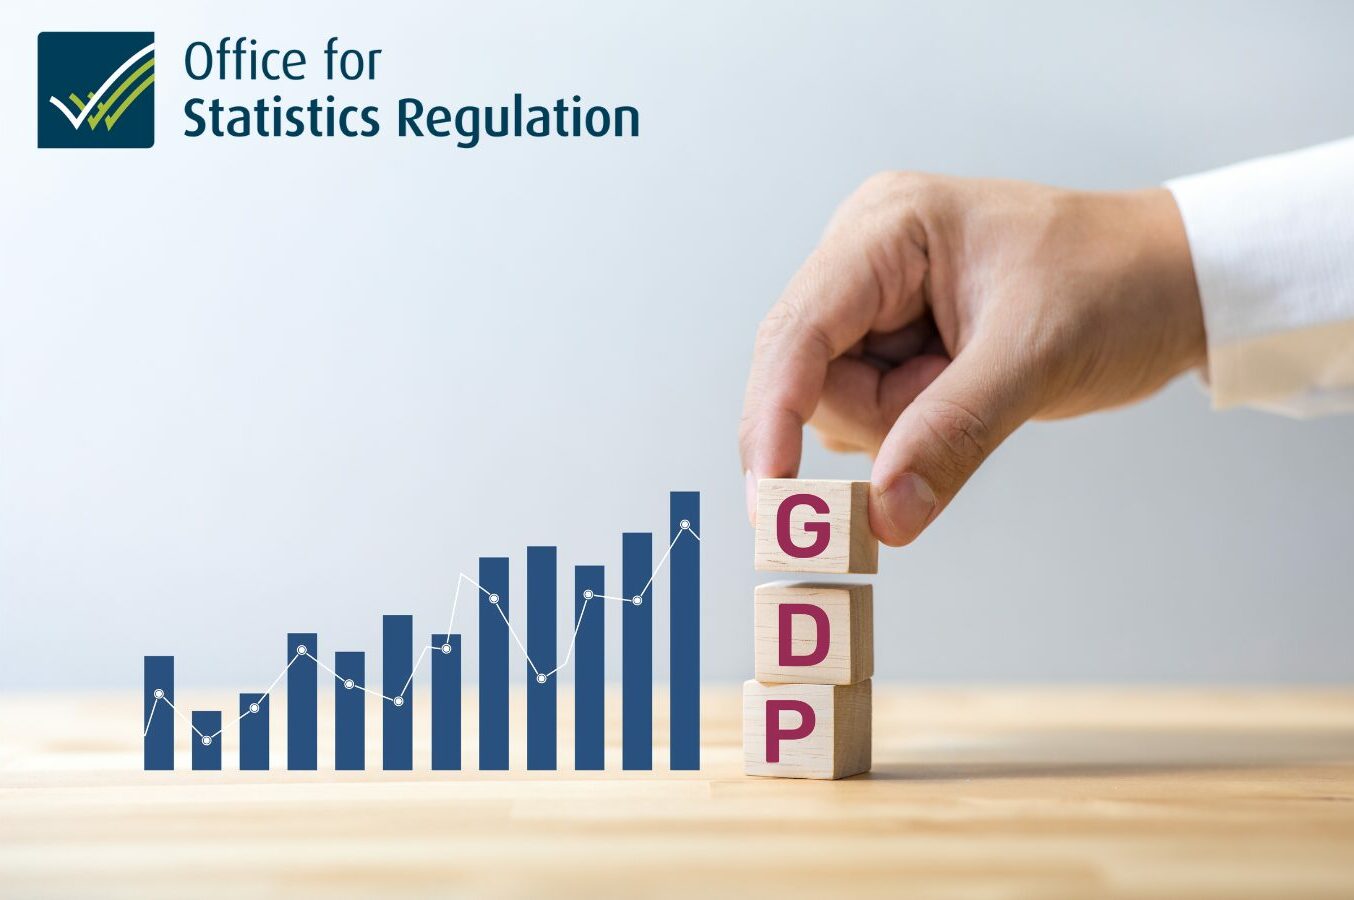 A hand placing three blocks on a table with the letters "GDP" next to a bar chart